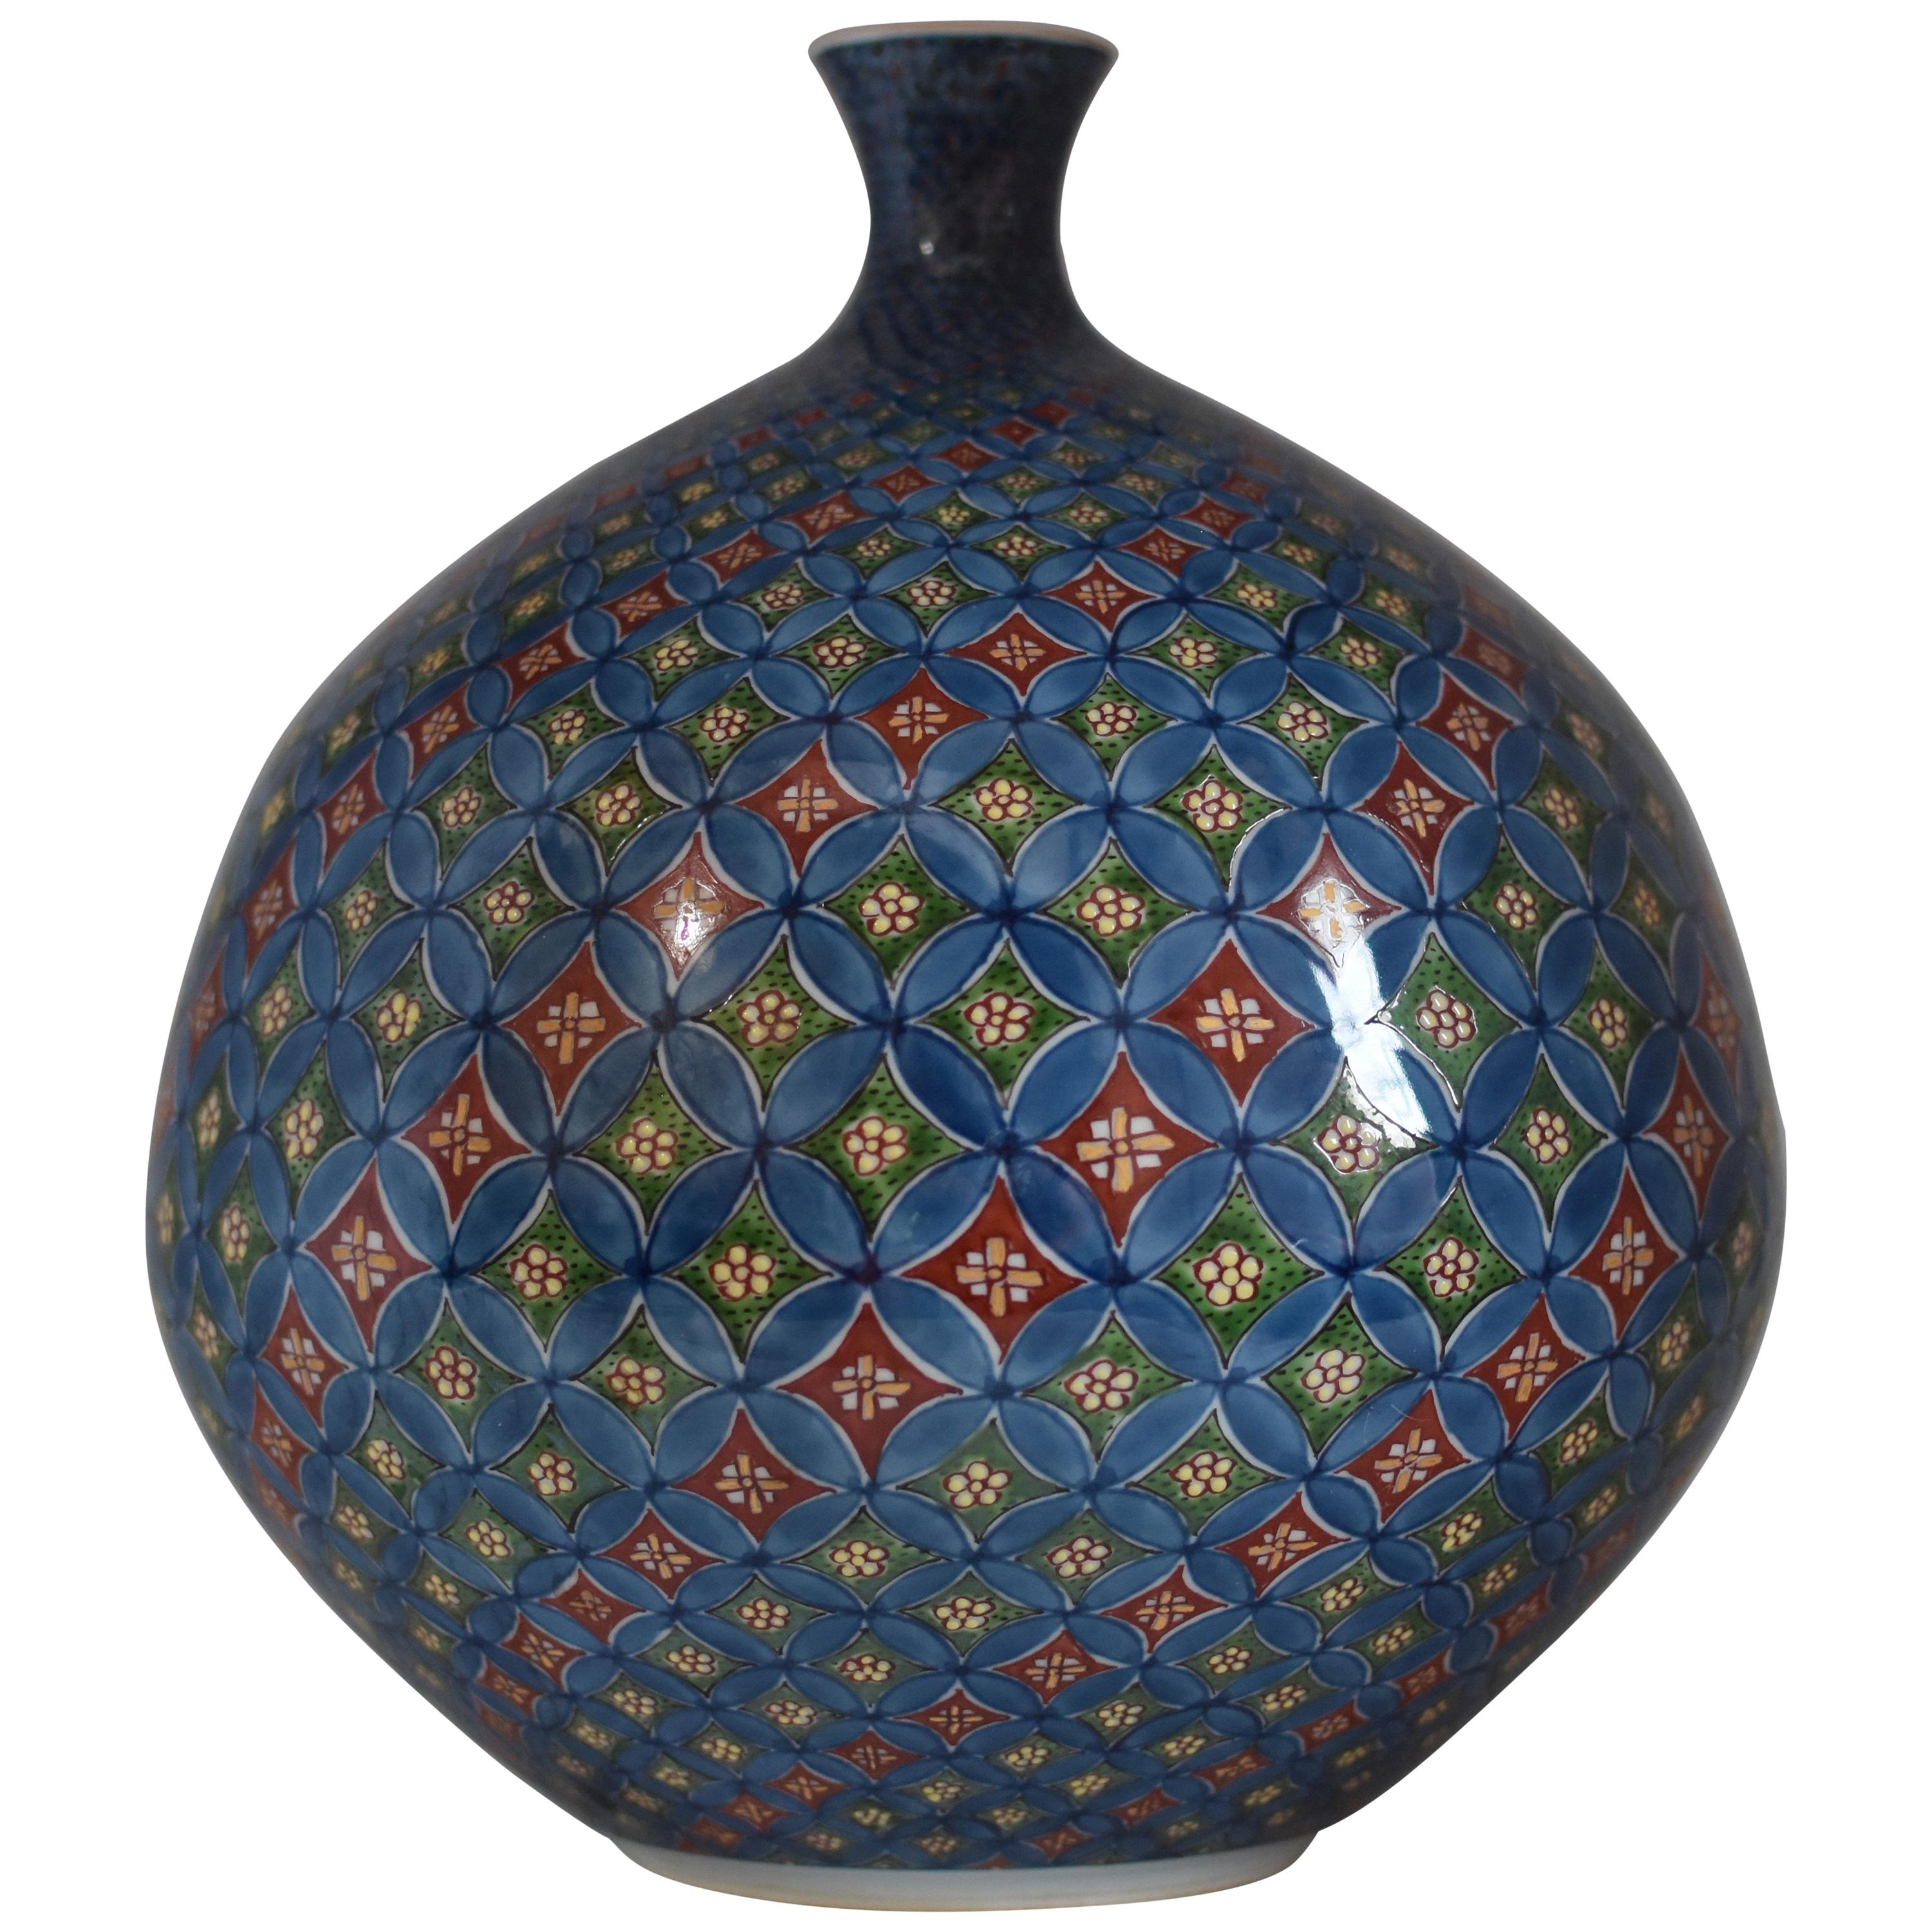 Contemporary Japanese Red Blue Green Porcelain Vase by Master Artist, 4